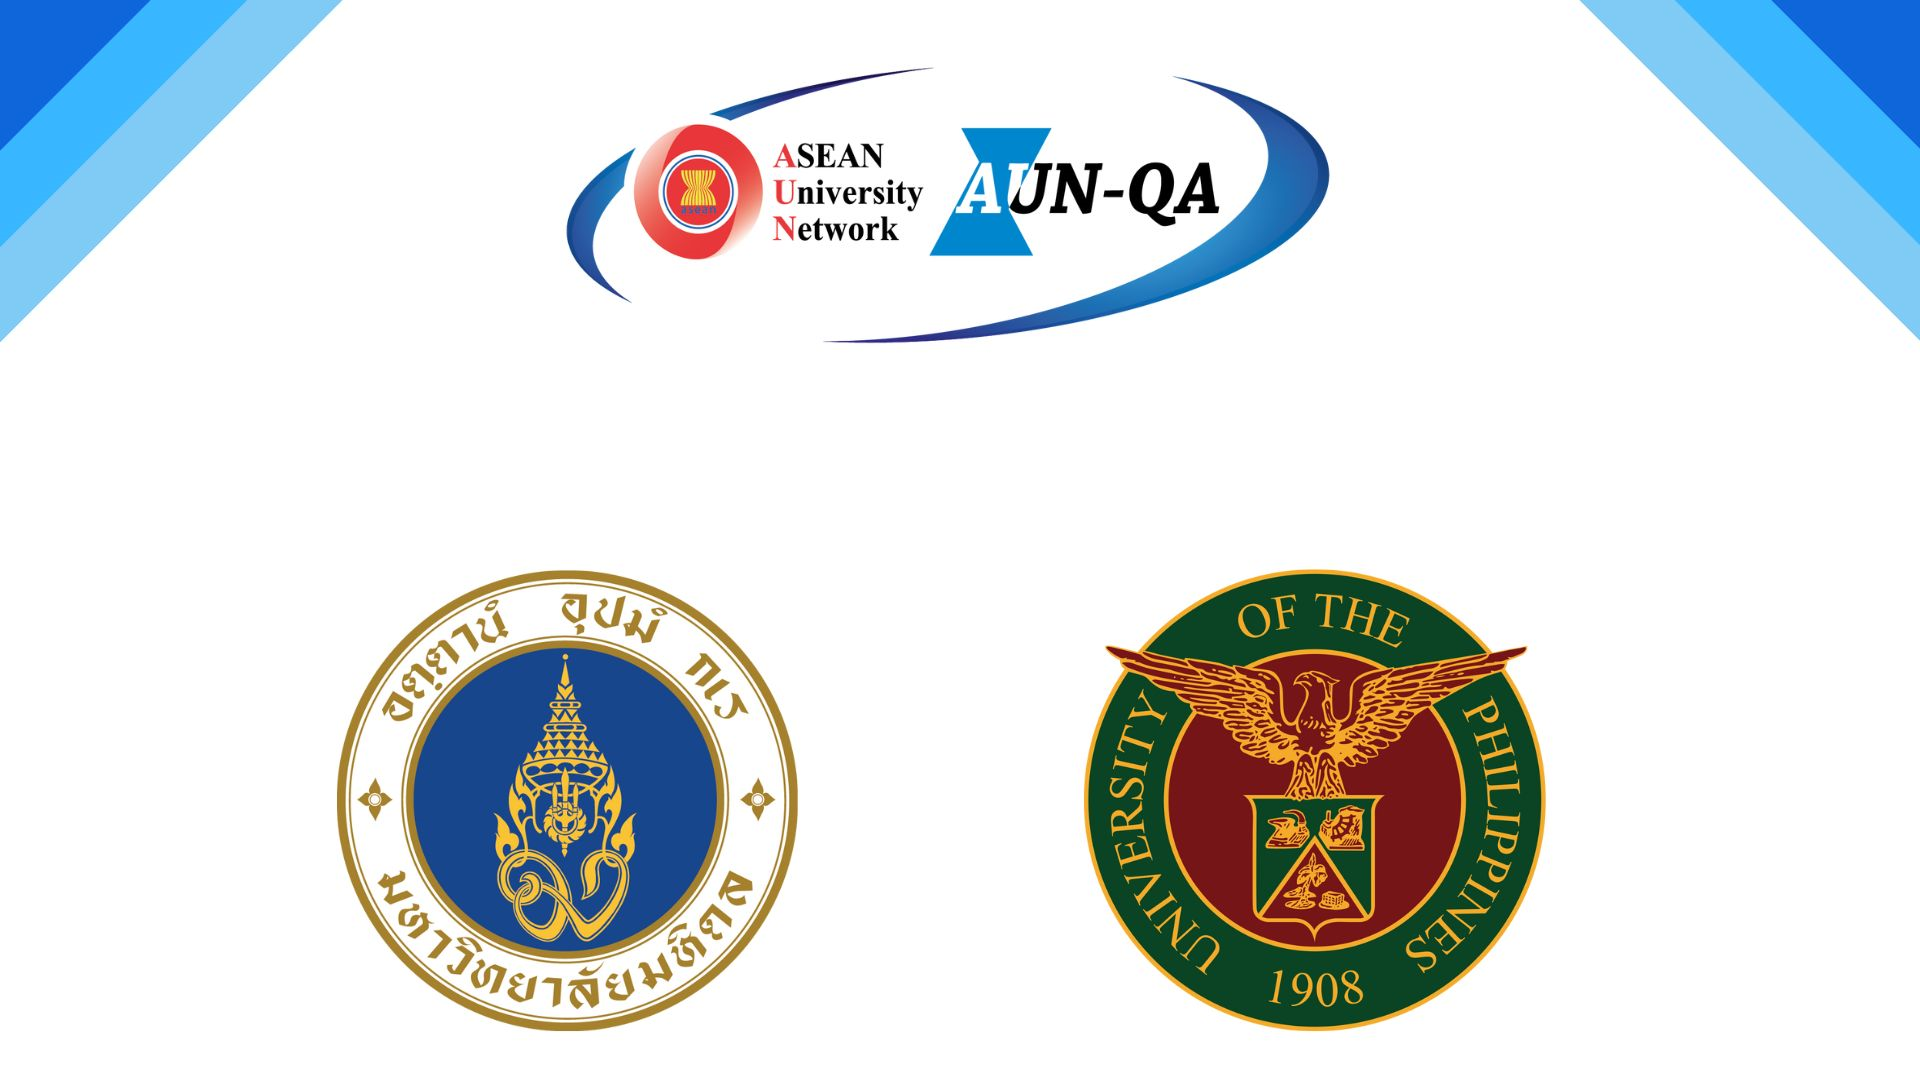 Top Two Universities of the ASEAN Region Took Part in the 303rd and 304th AUN-QA Programme Assessments